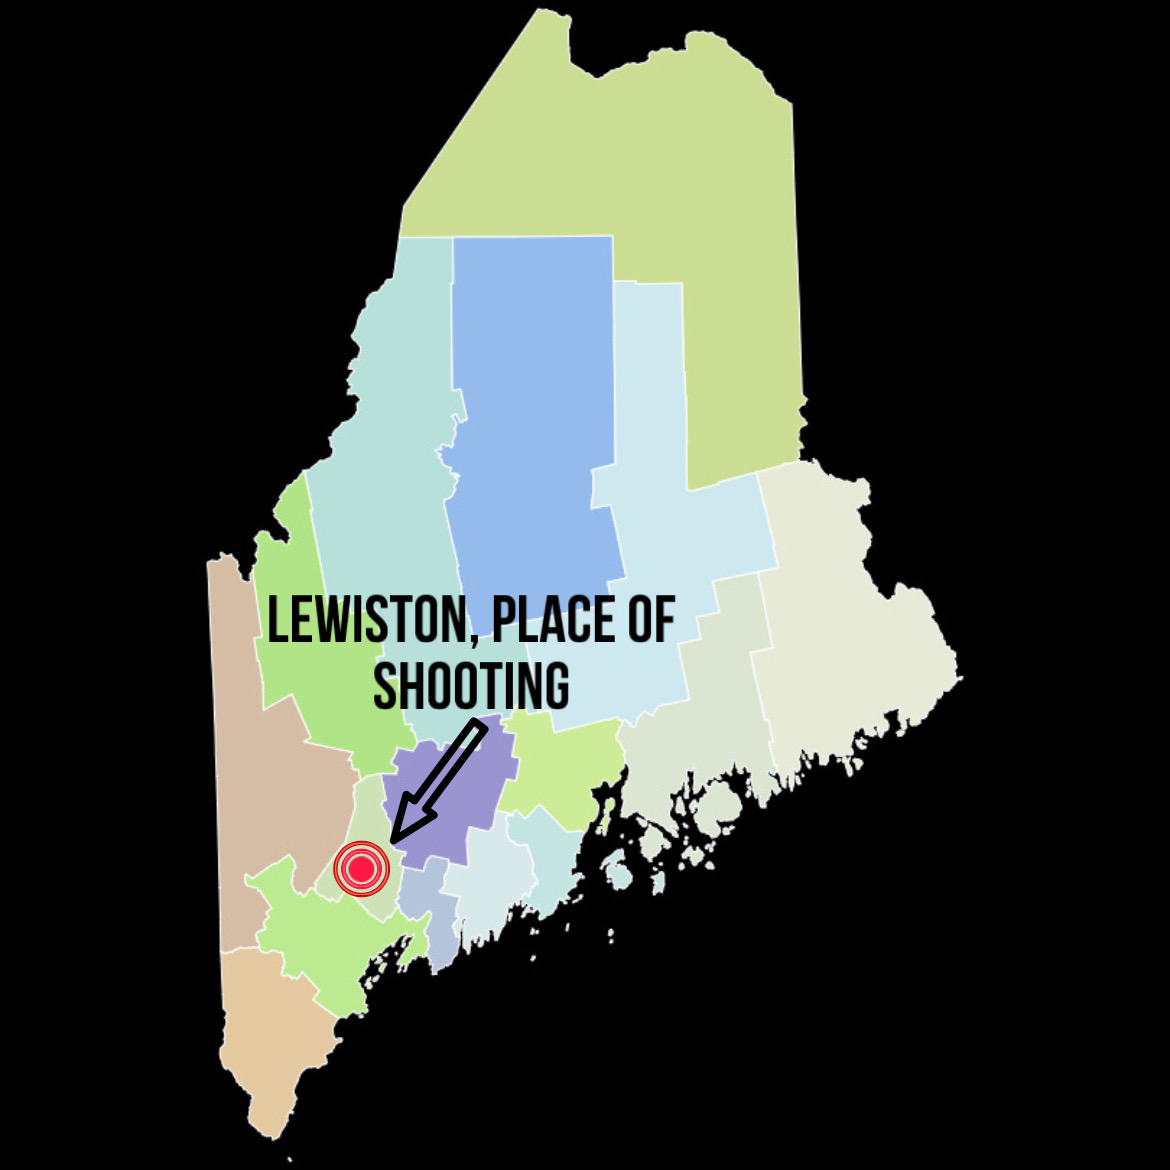 A rough location of where the shootings that killed 18 occurred